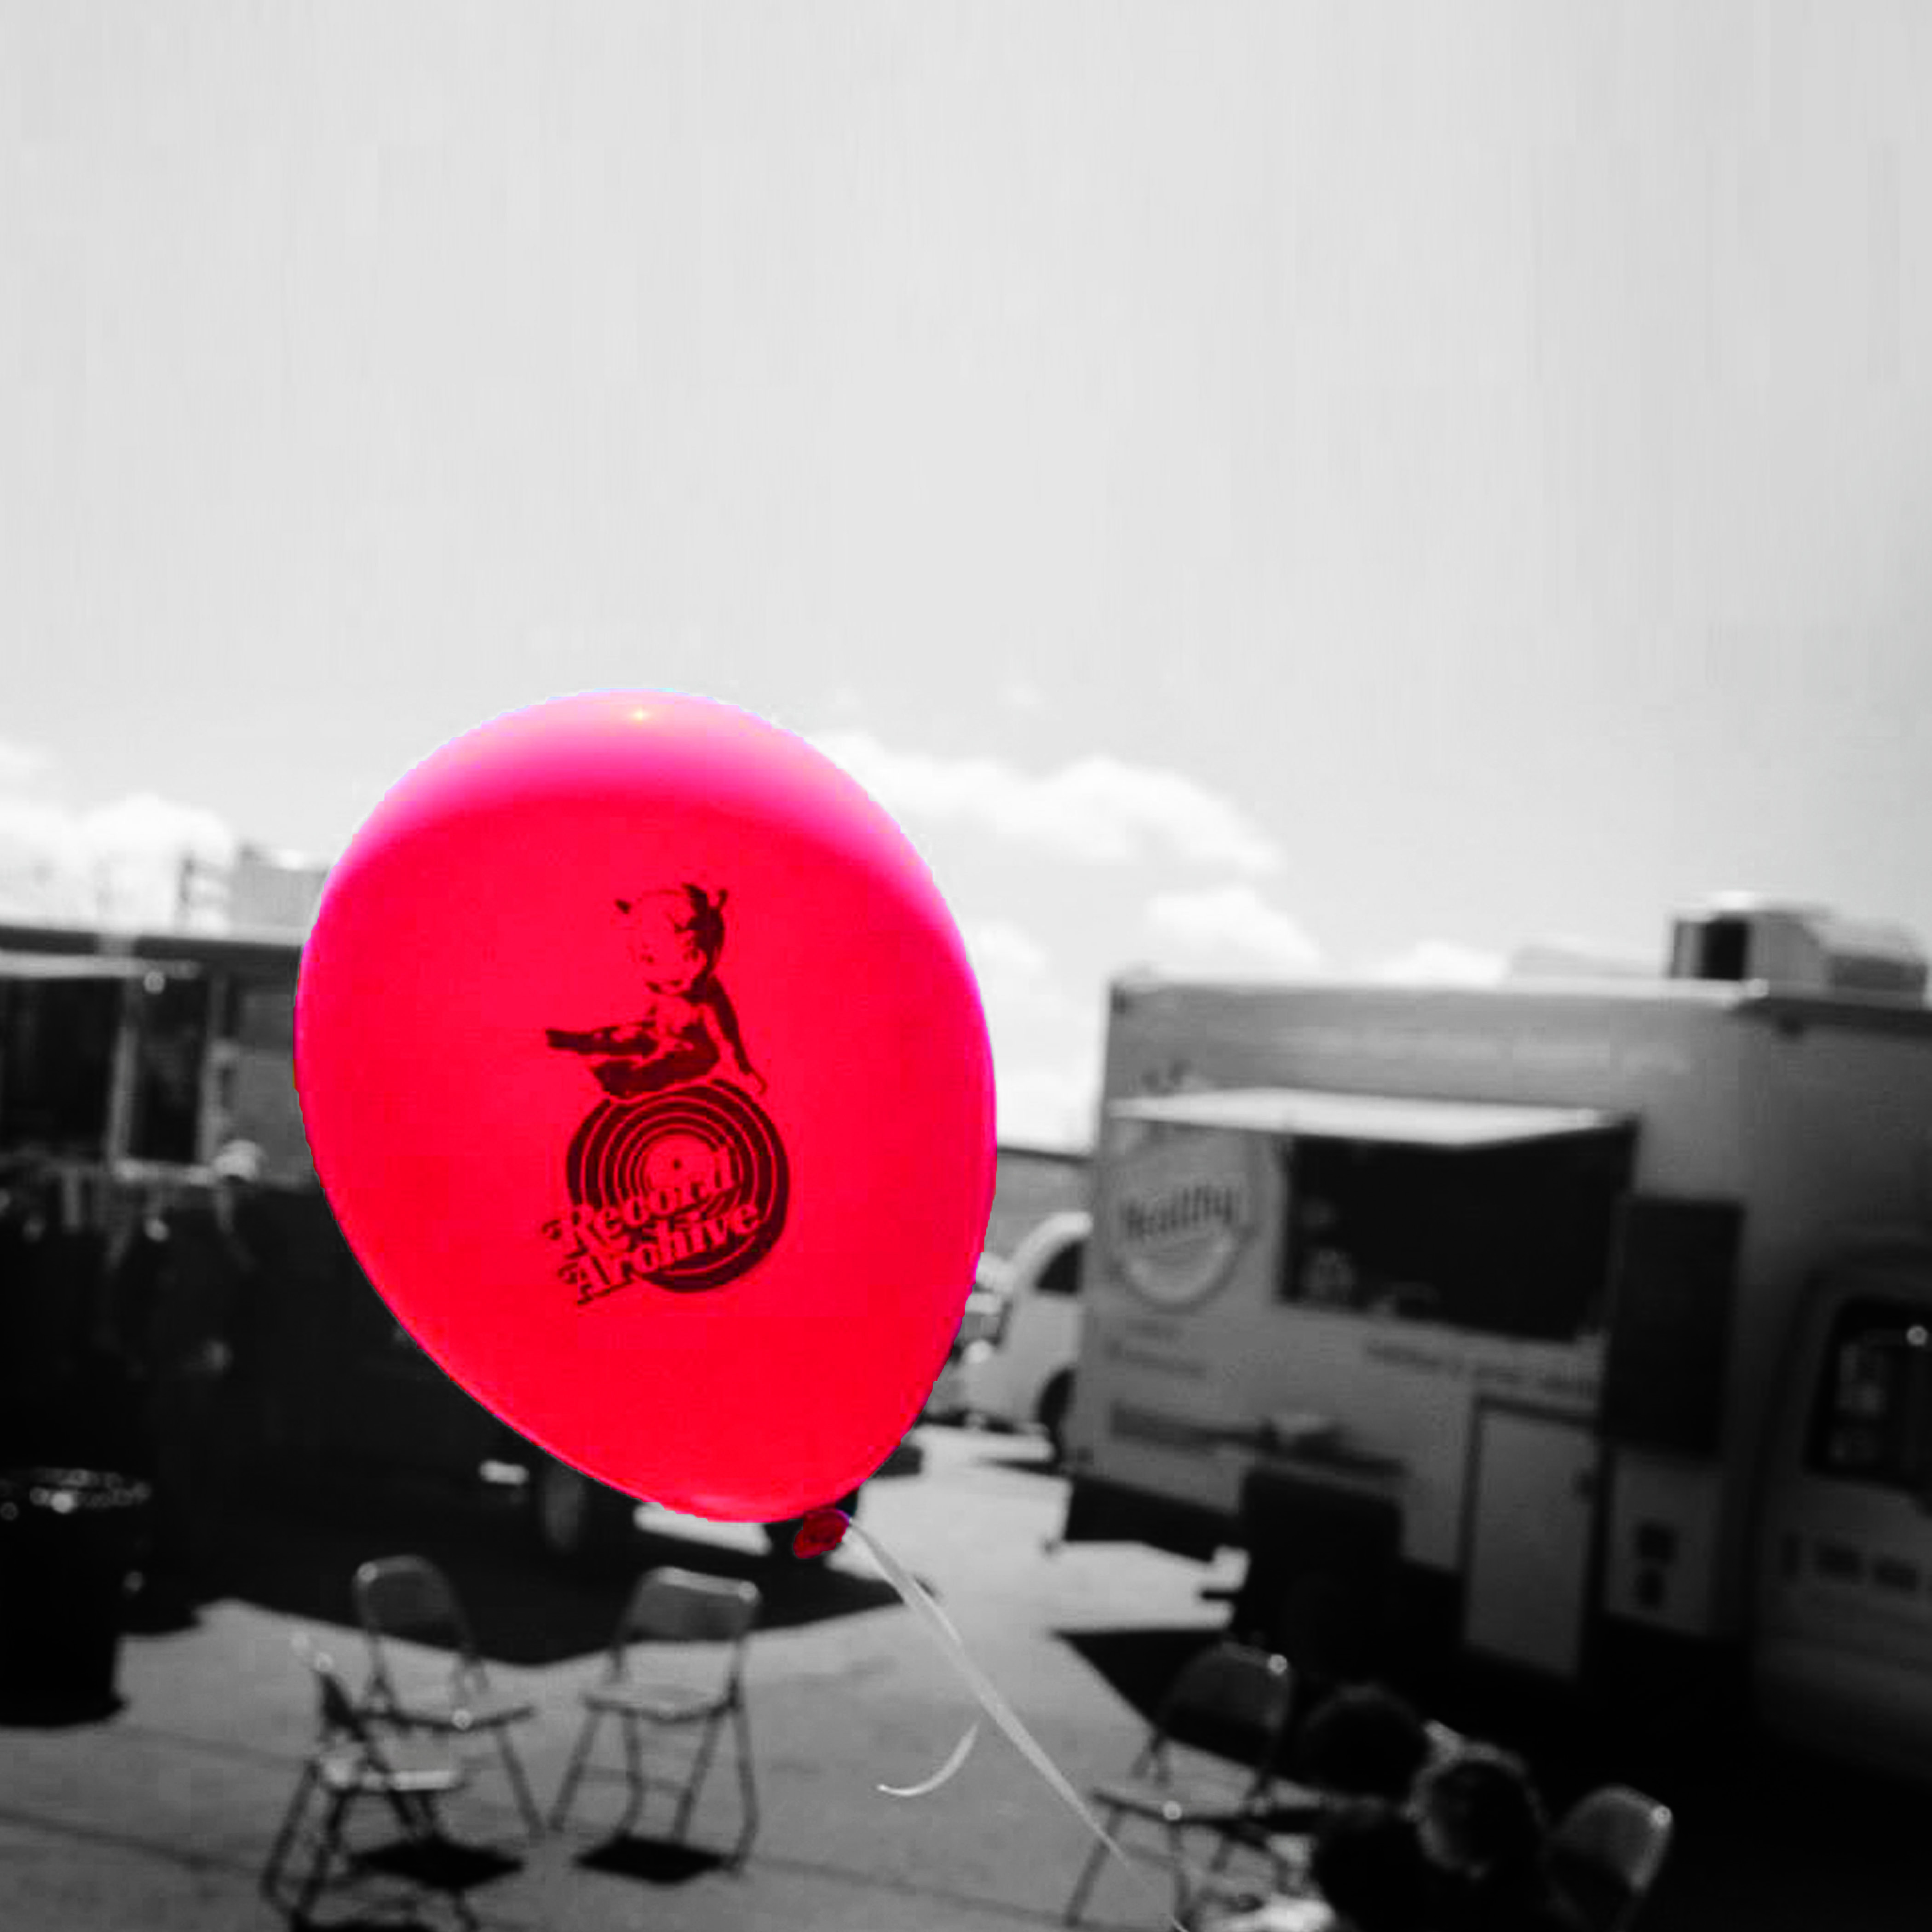 Red Record Archive balloon